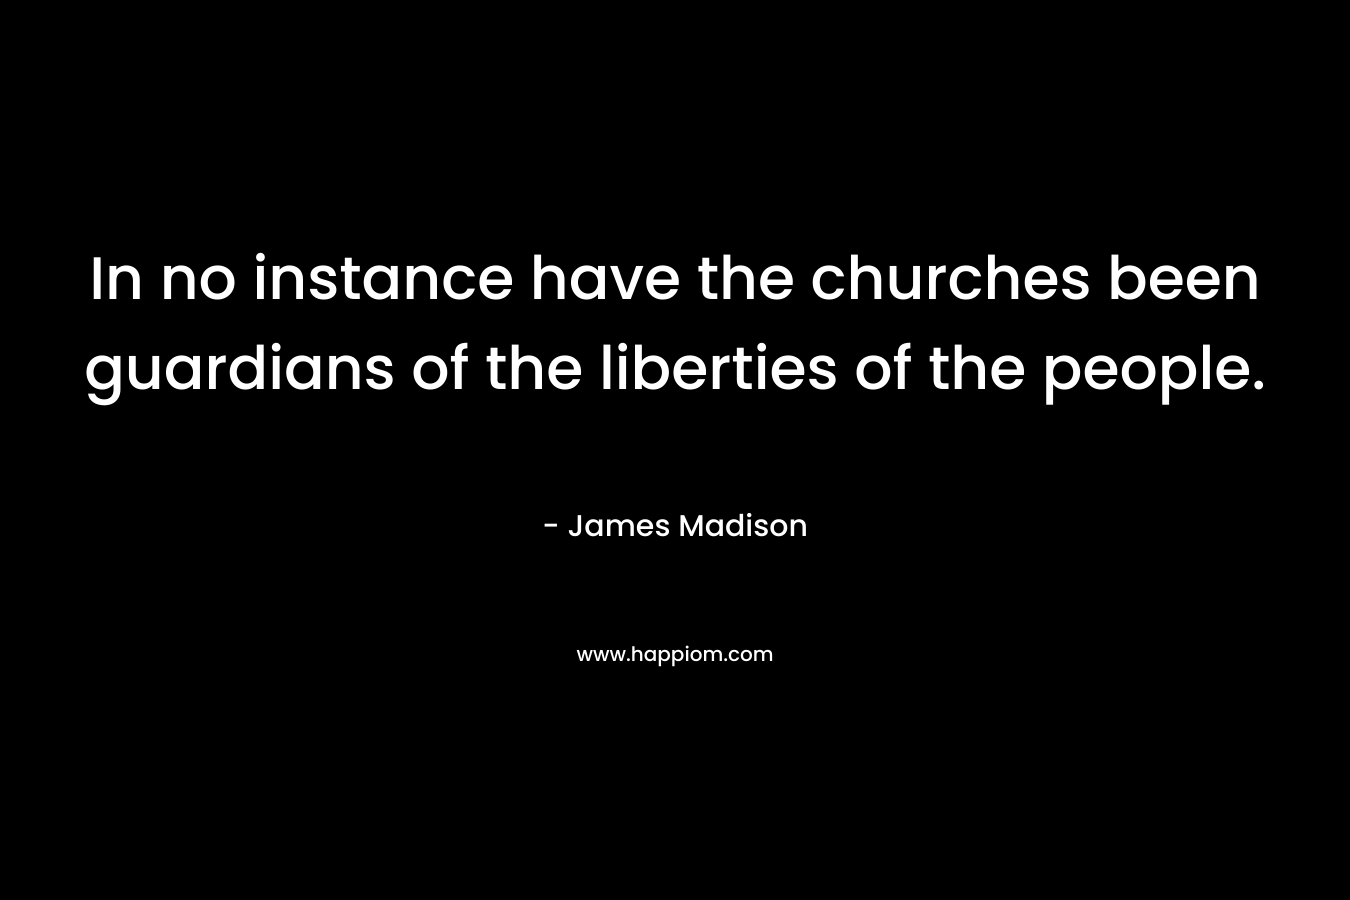 In no instance have the churches been guardians of the liberties of the people.